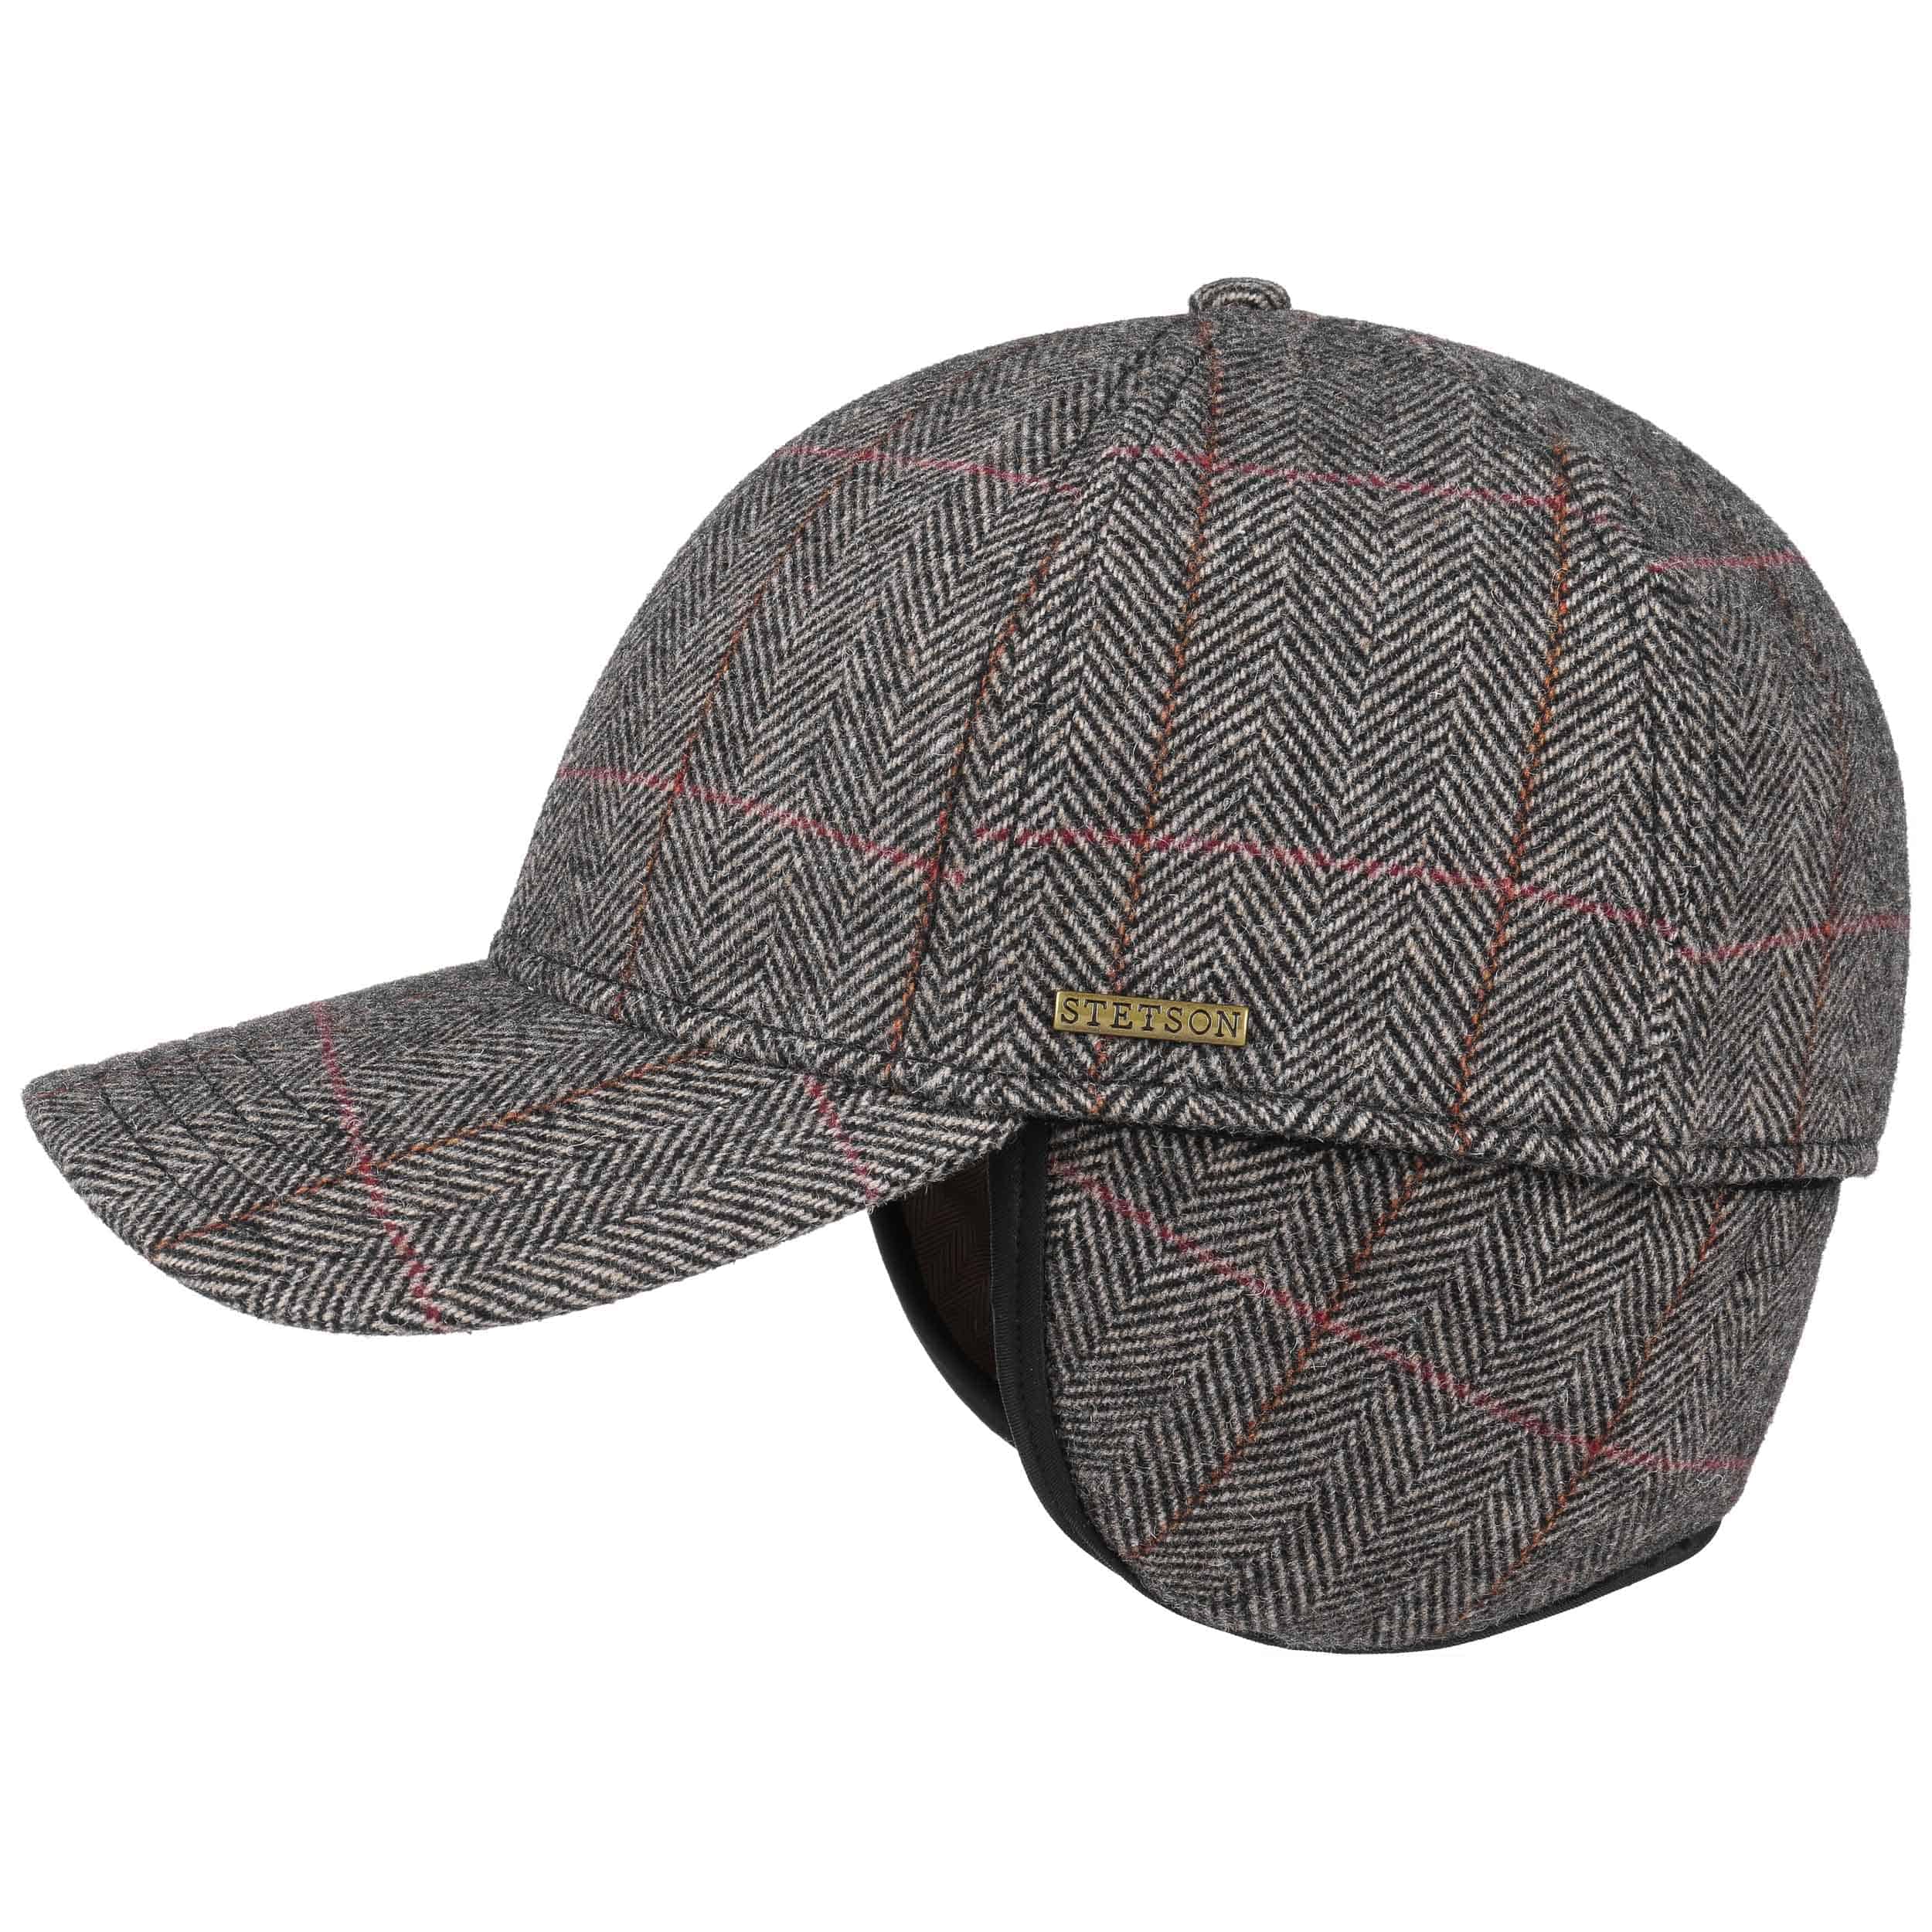 Kinty Wool Cap with Ear Flaps by Stetson - 69,00 €